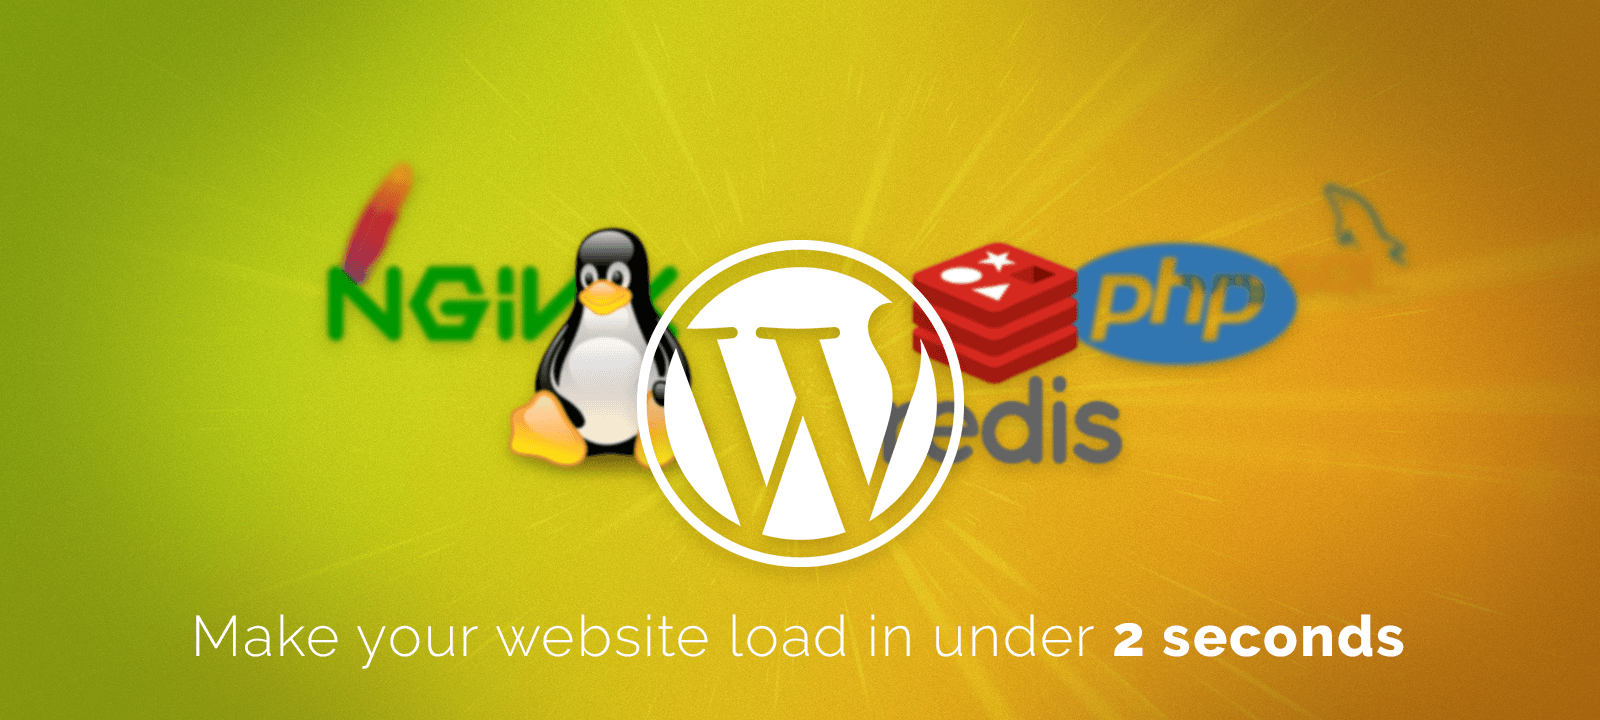 How to make your website load in under 2 seconds using Apache, Nginx, Redis, PHP7, MySQL, and WordPress